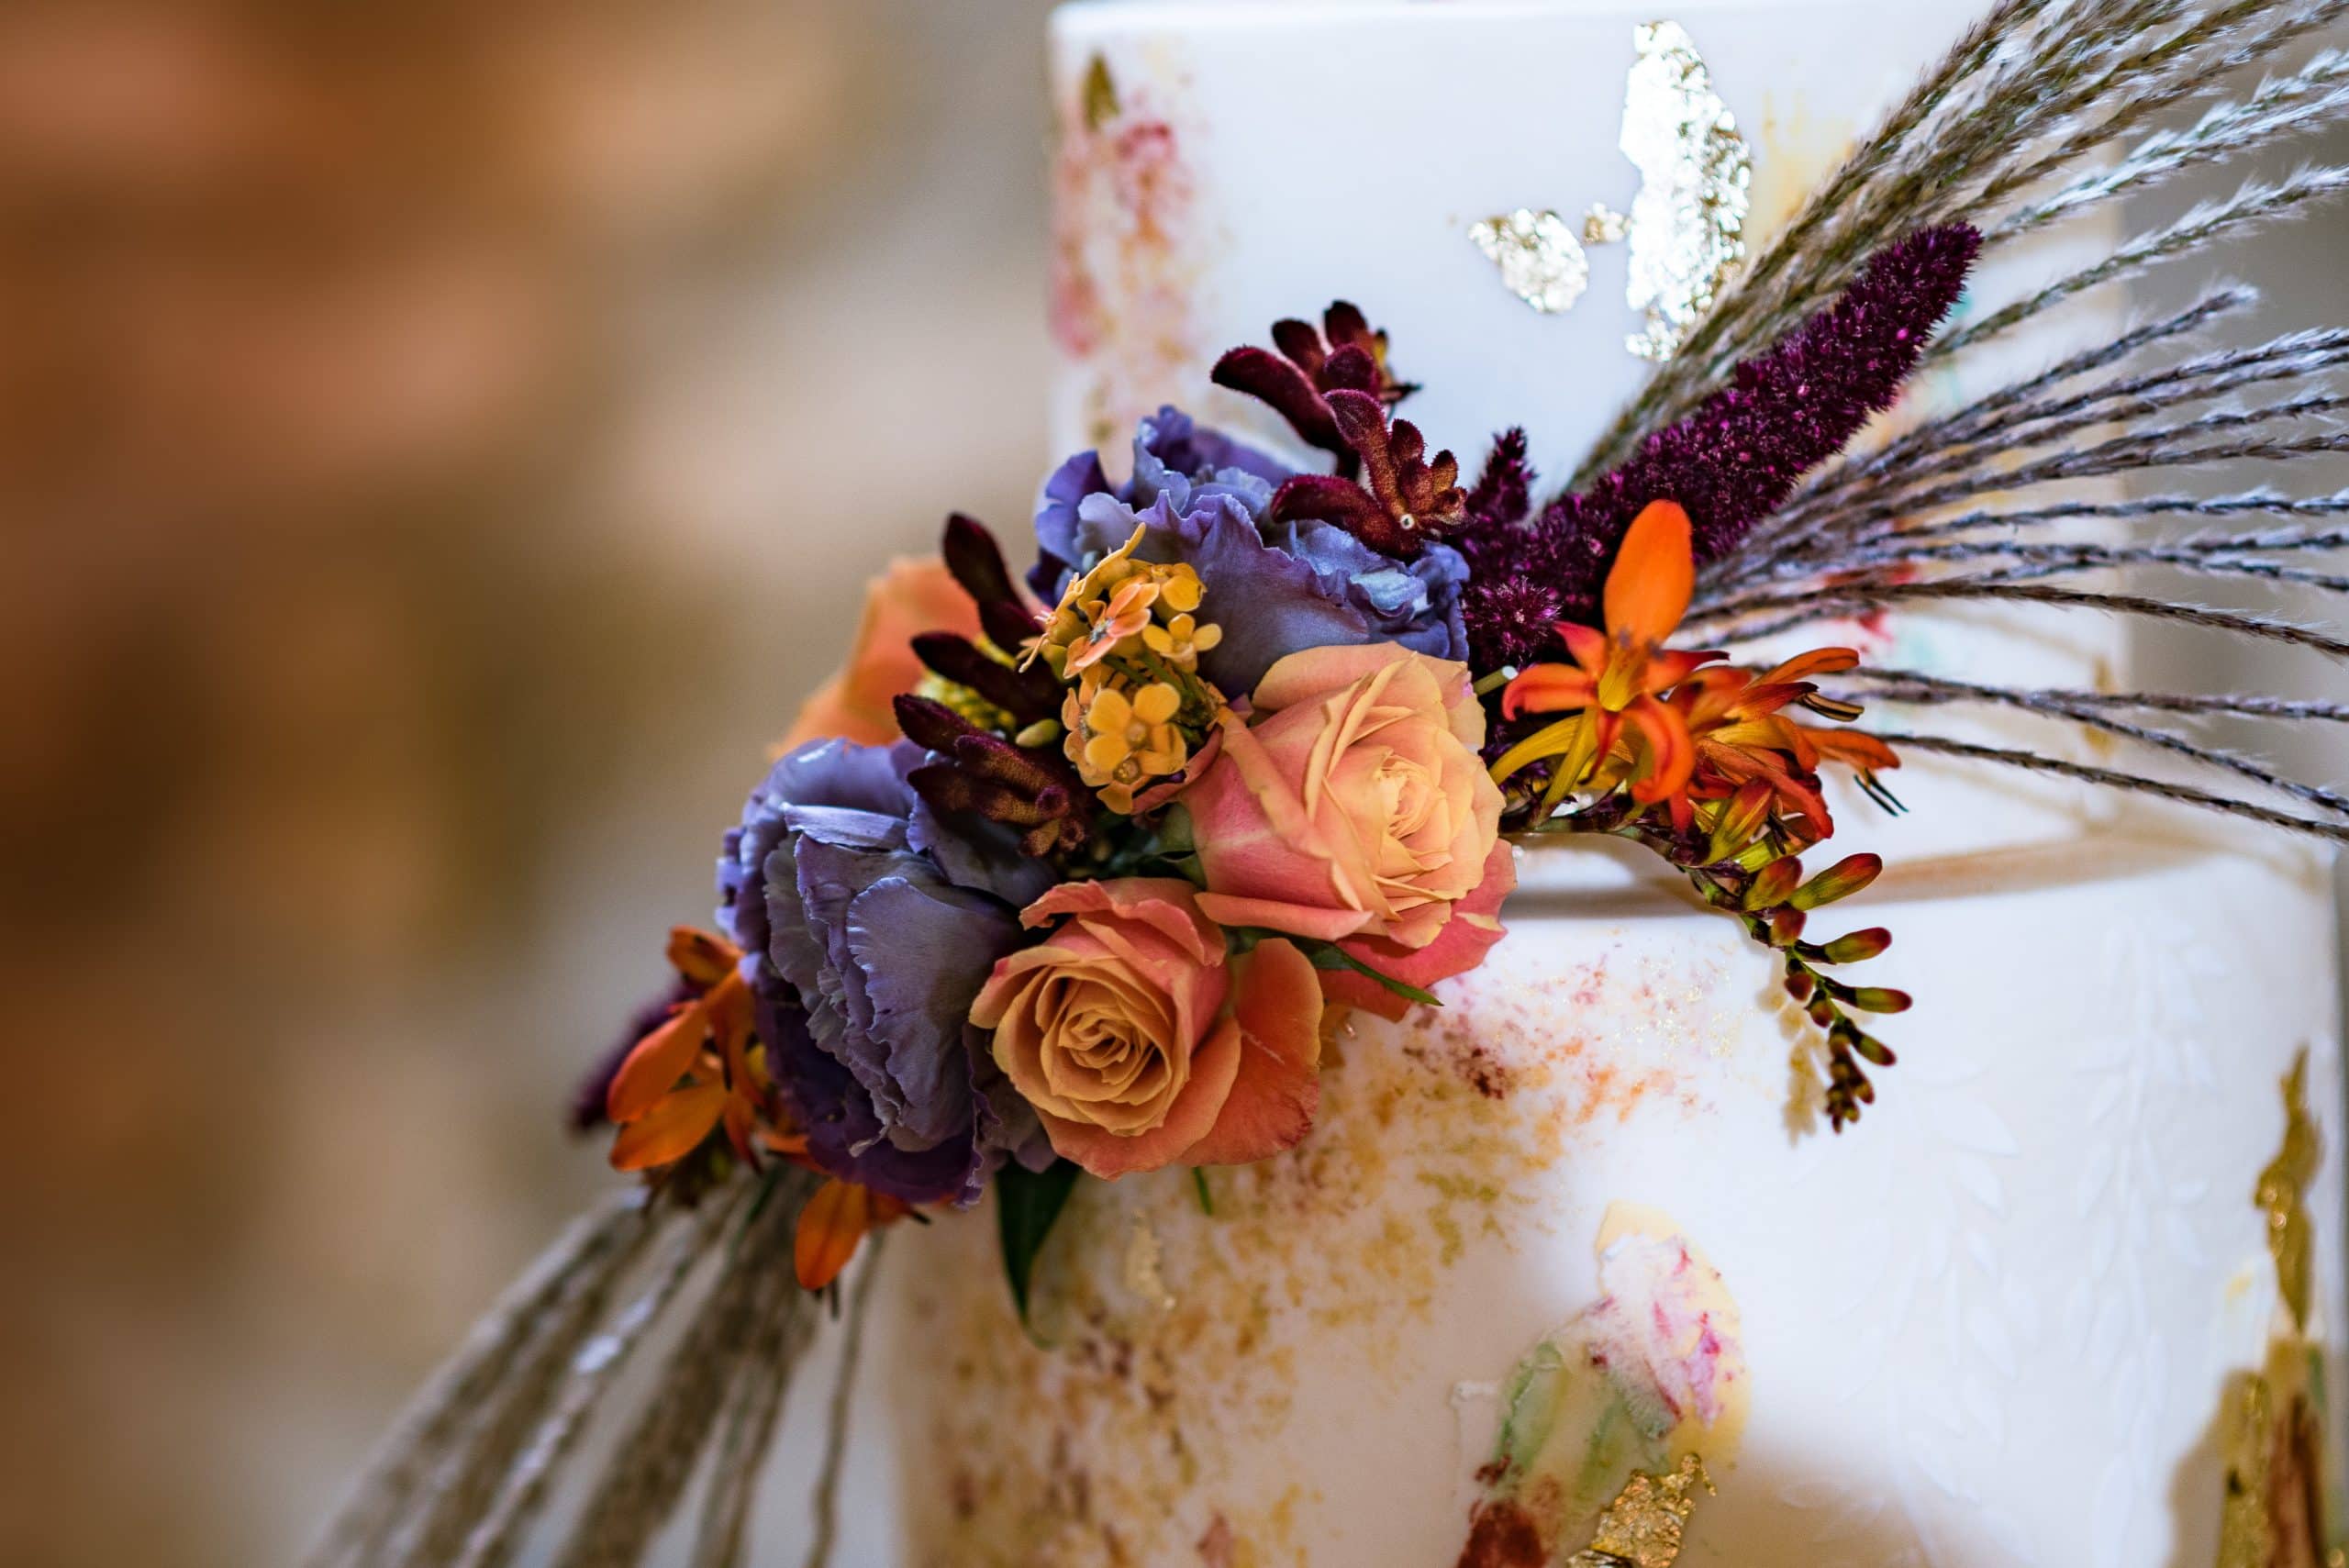 Autumn inspired flowers on the wedding cake captured by Pedge Photography